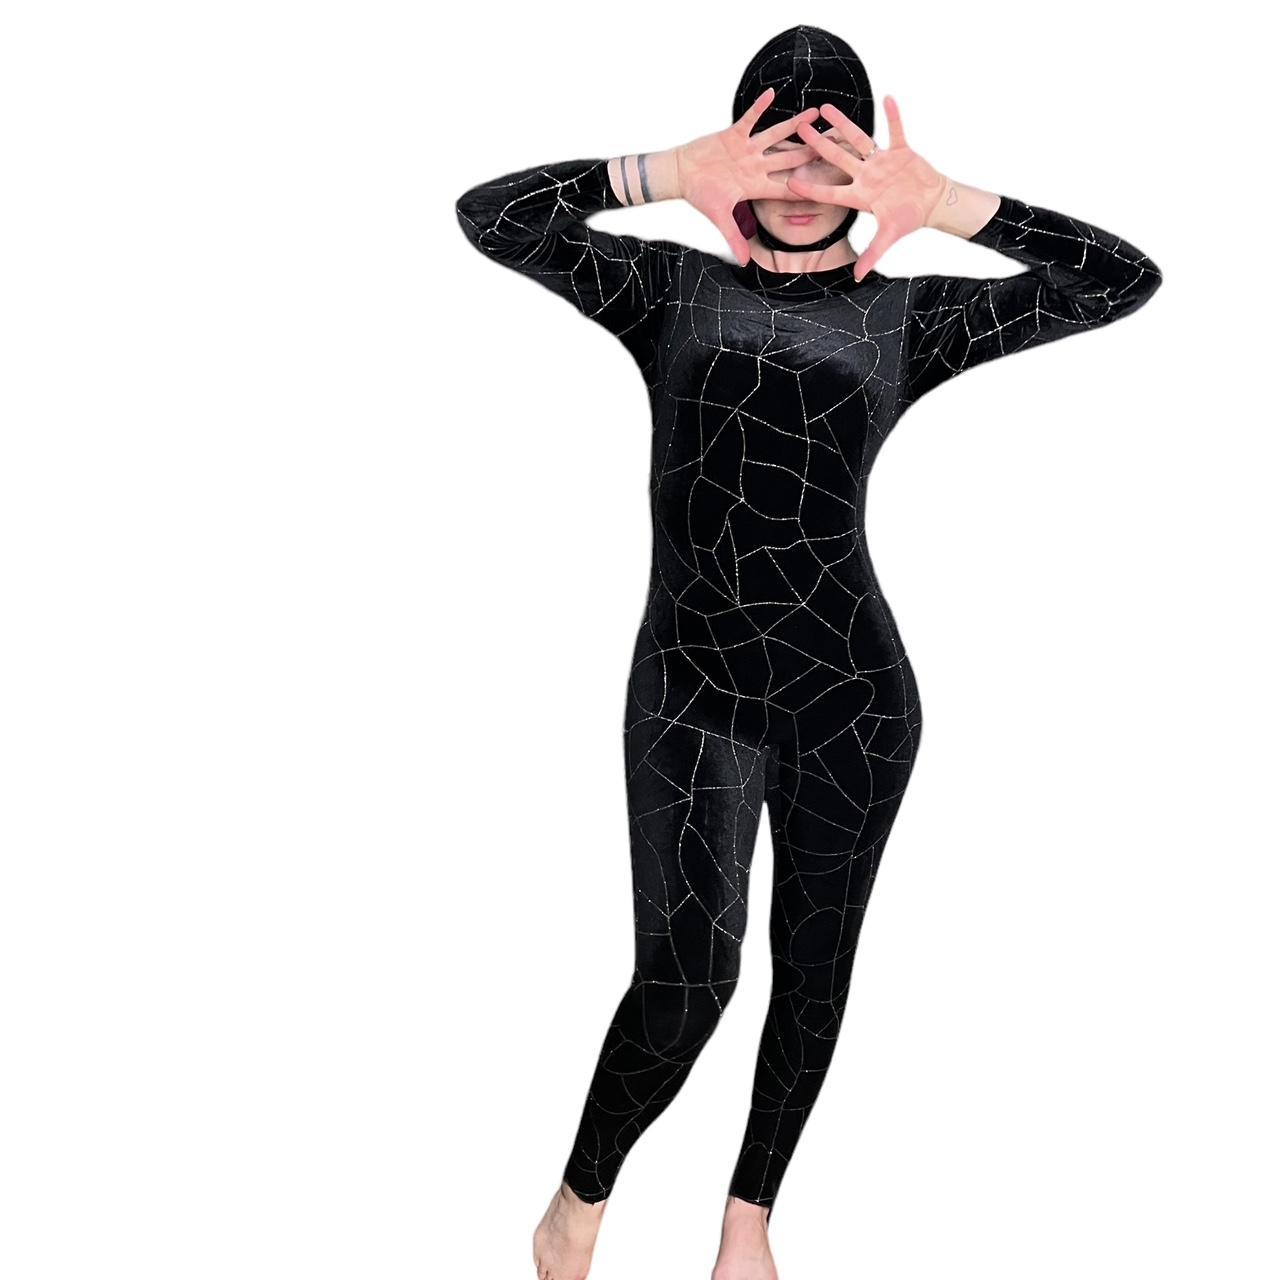 Full Bodysuit Womens Costume Without Hood Lycra Spandex Stretch